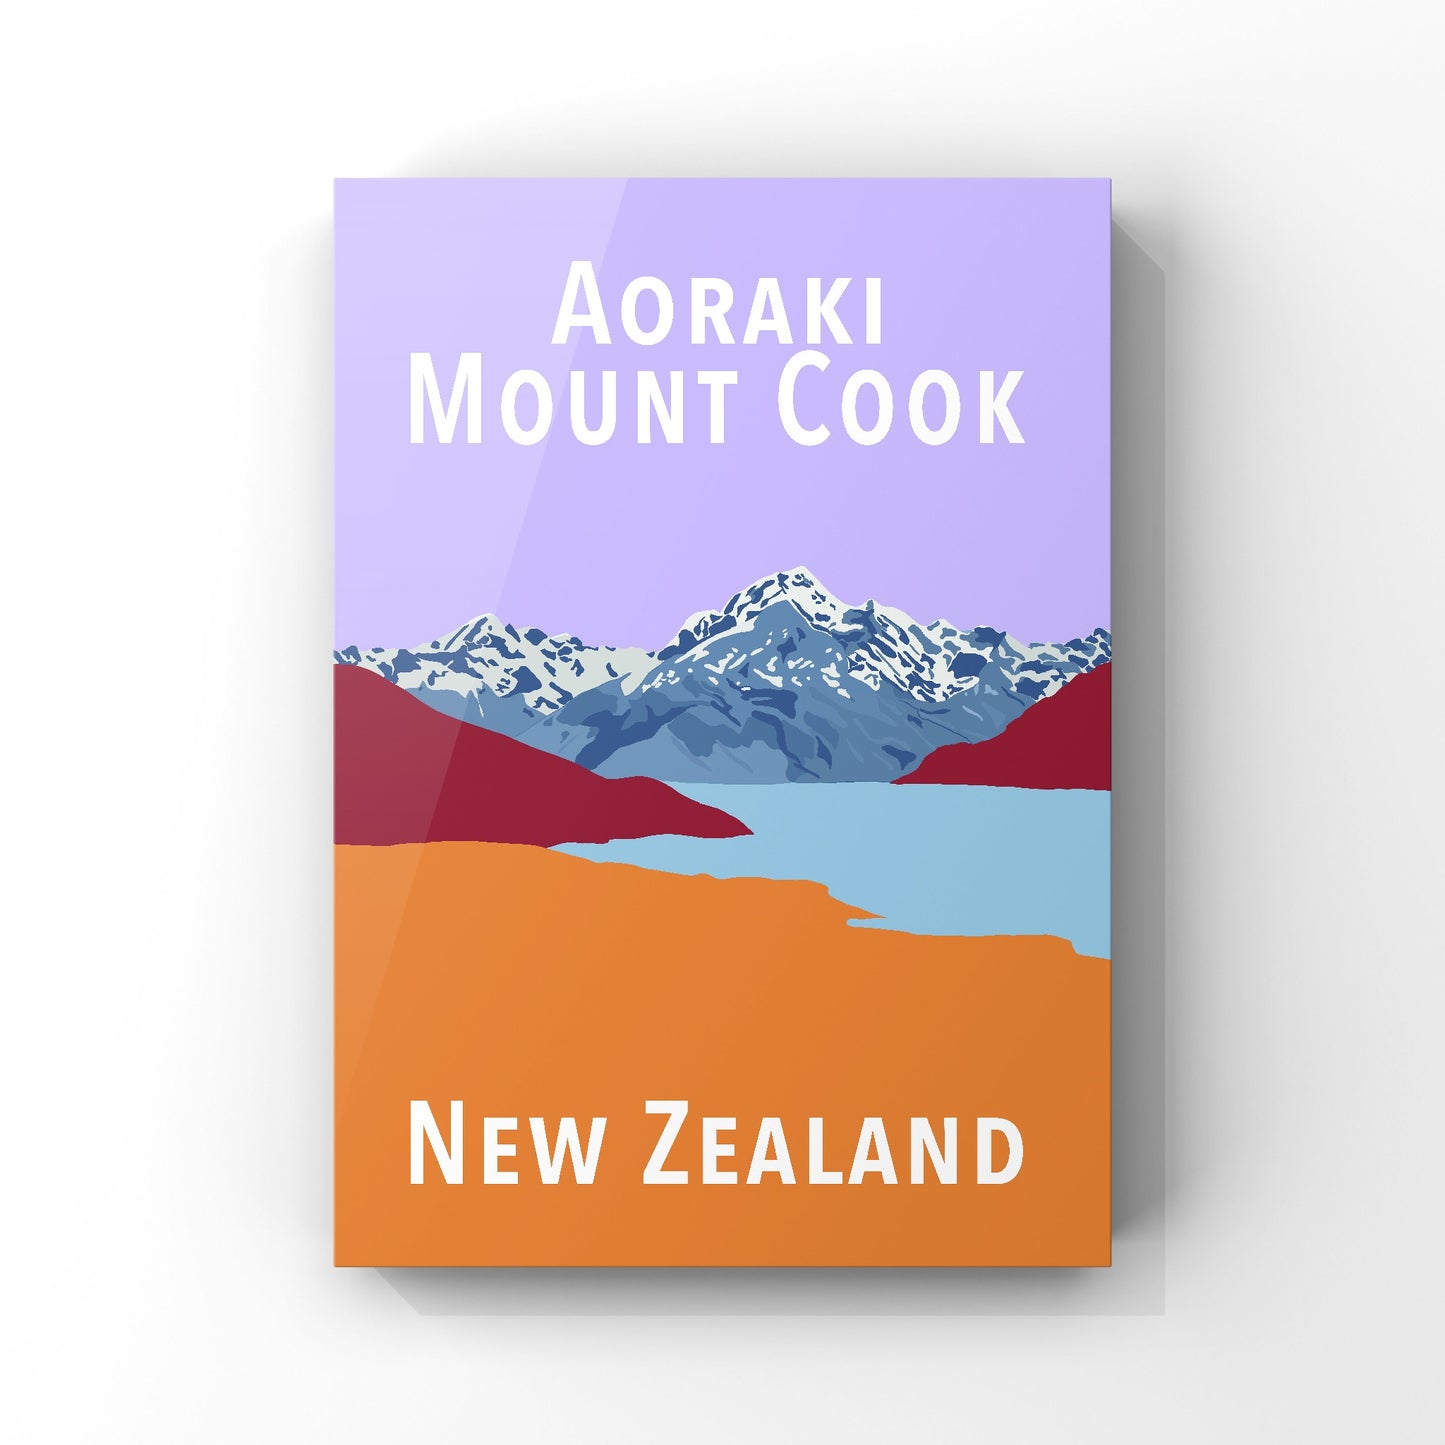 Mount Cook - in purple and orange poster